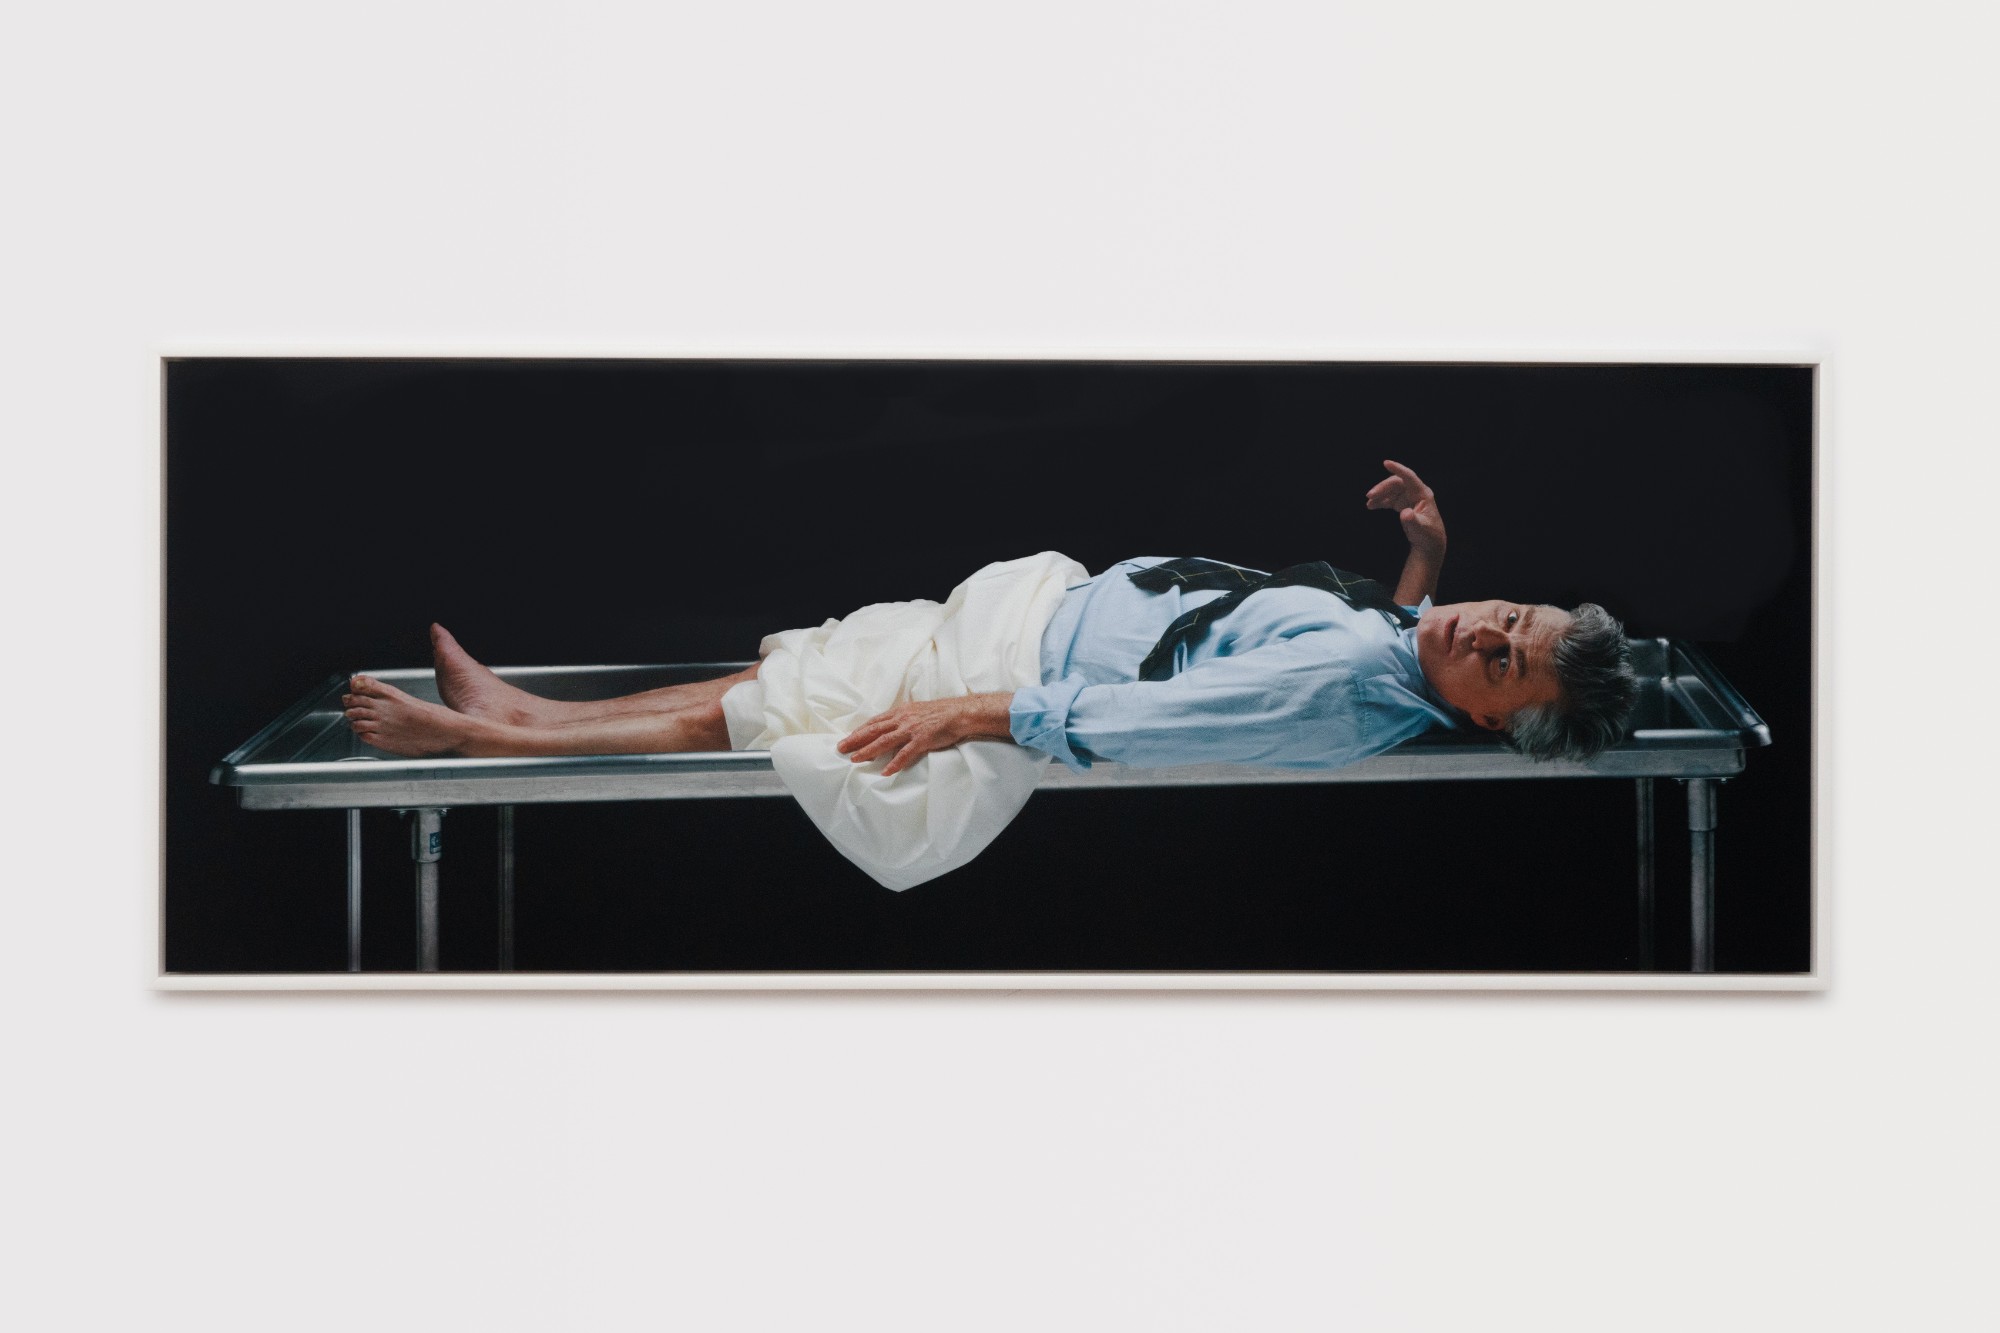 [Image Descriptions: A horizontal photograph depicts a middle-aged white man—the Canadian actor and filmmaker, Nicholas Campbell. He is lying face up upon a stainless steel mortuary table. Part of his upper body and head hangs off the edge of the rimmed table, and his gaze is oriented to the viewer. His legs and feet are bare from the knee down with a white sheet bundled over his waist and thighs. He wears a blue collared shirt and his black plaid tie is askance over his chest. His right hand points loosely upwards near his face: with eyes wide, brows raised and mouth slightly agape.]